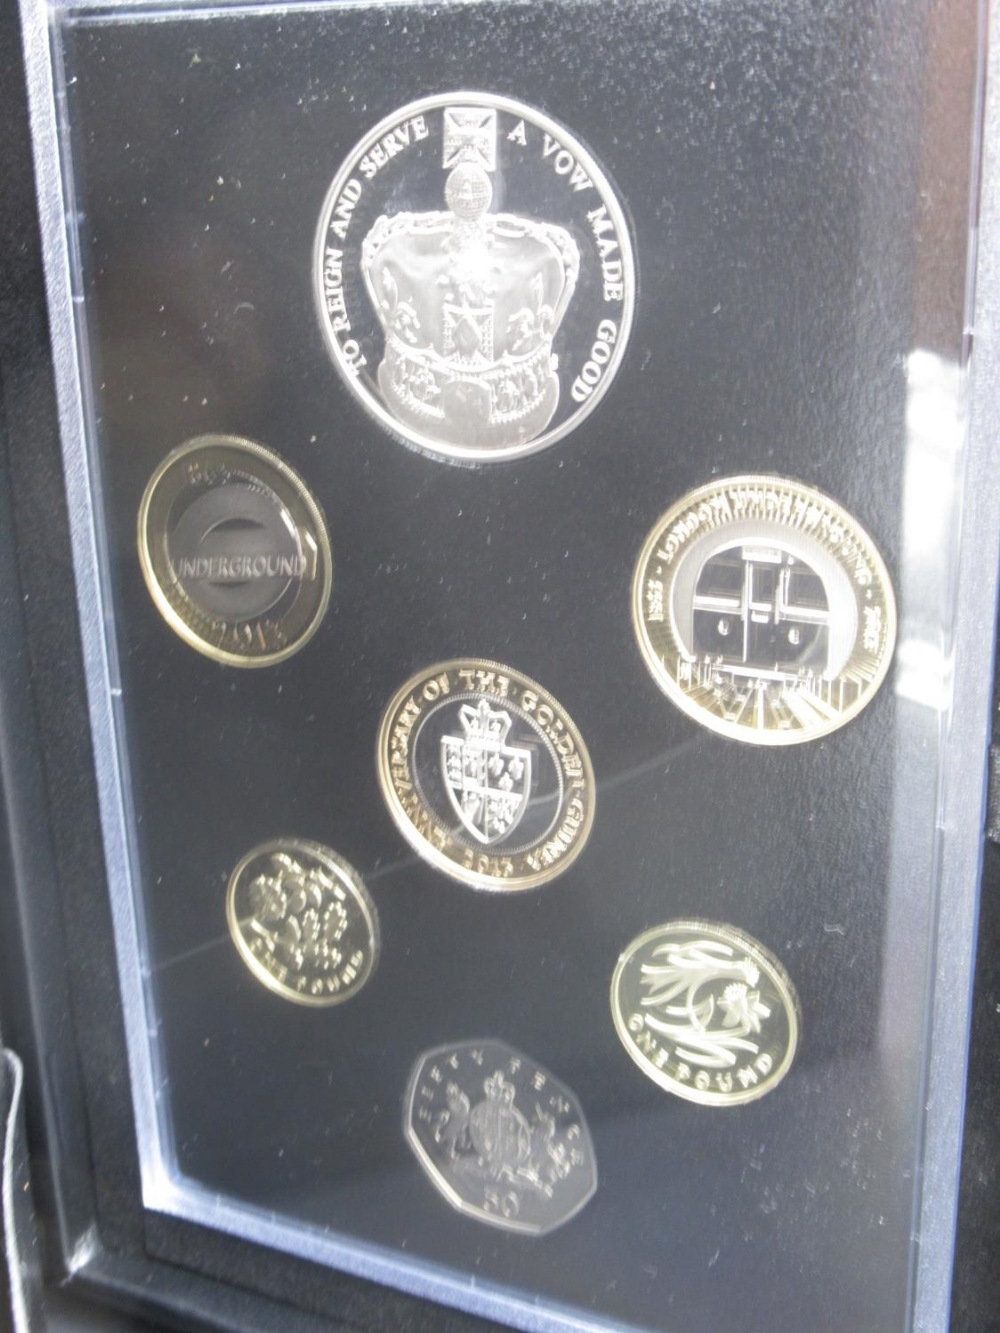 The Royal Mint - The 2013 United Kingdom Proof Coin Set Commemorative Edition seven coin set, - Image 3 of 3